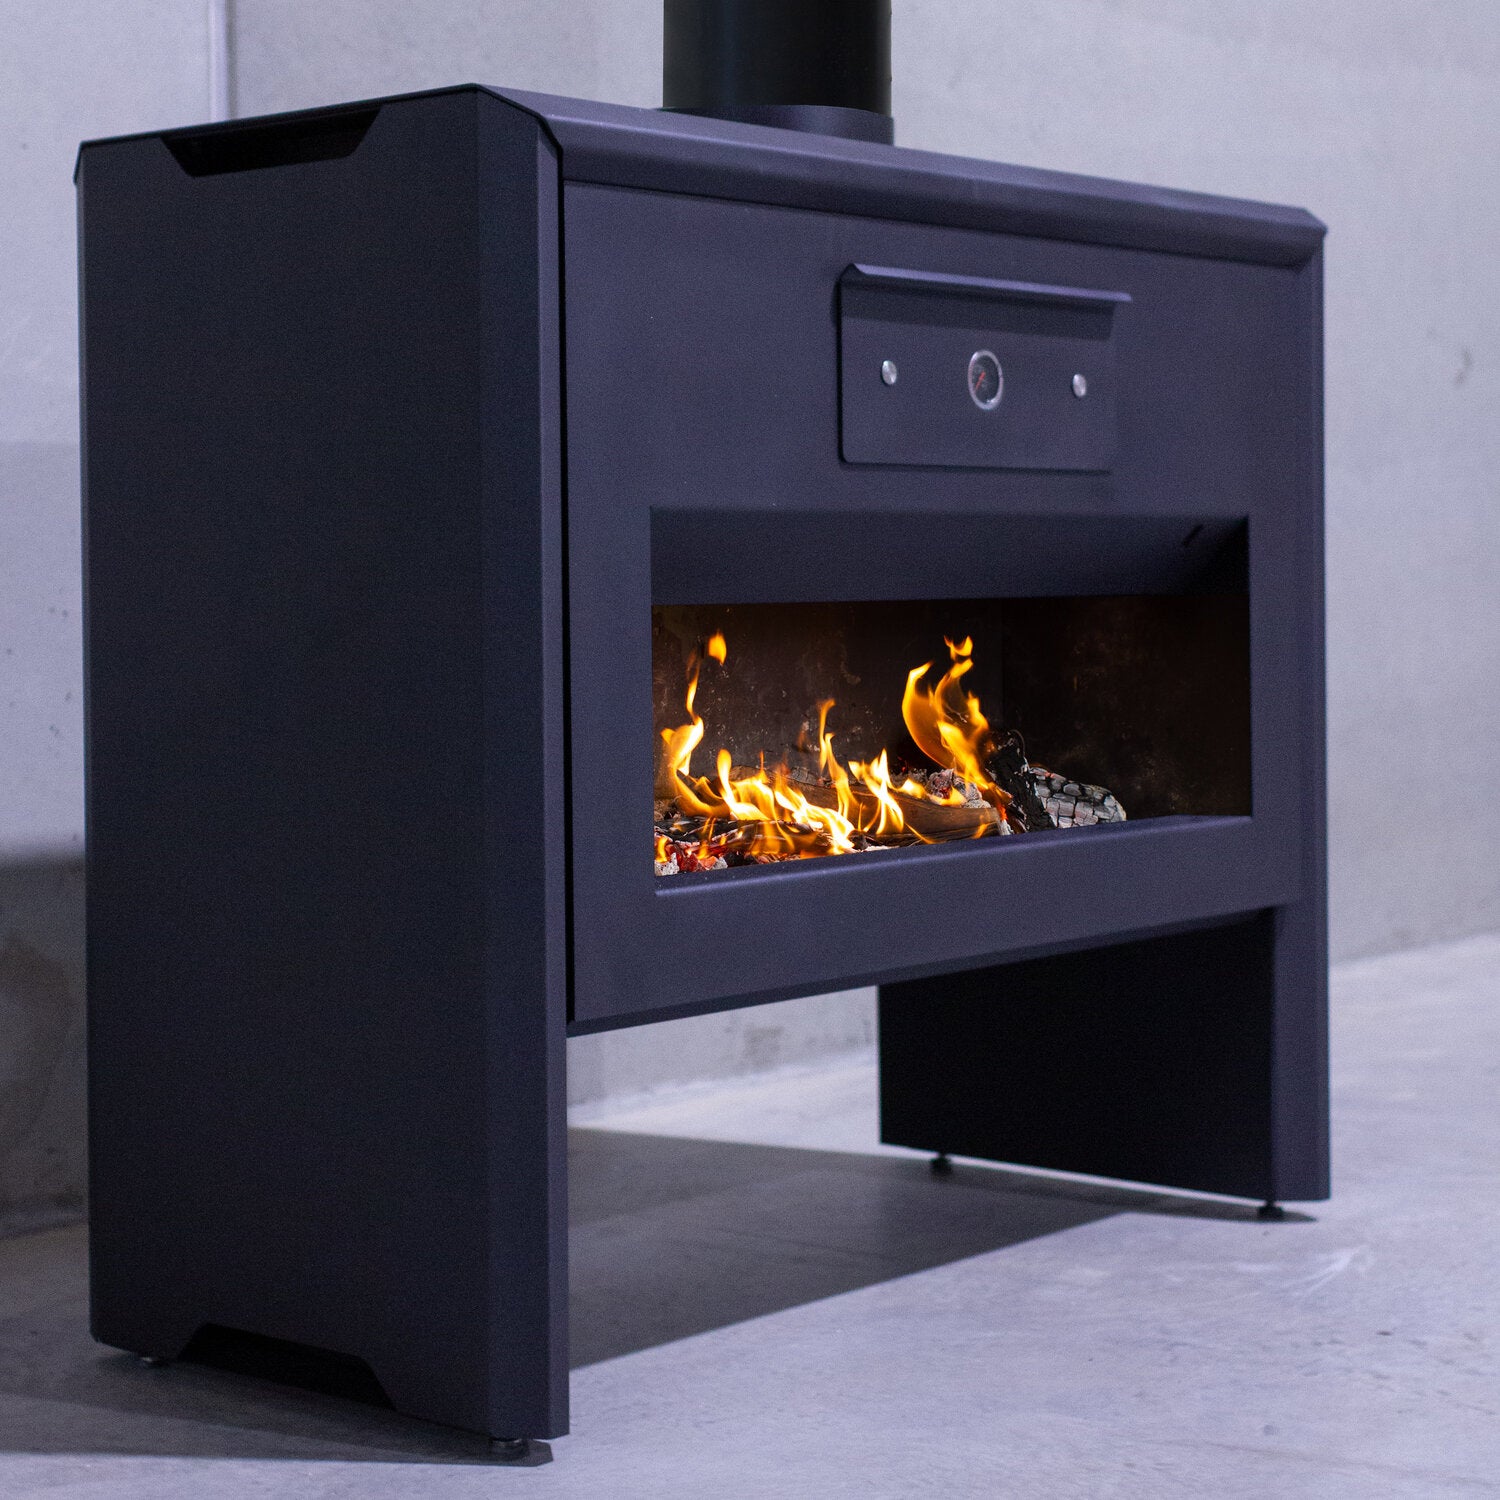 Woodfire oven - The Woodfired Co